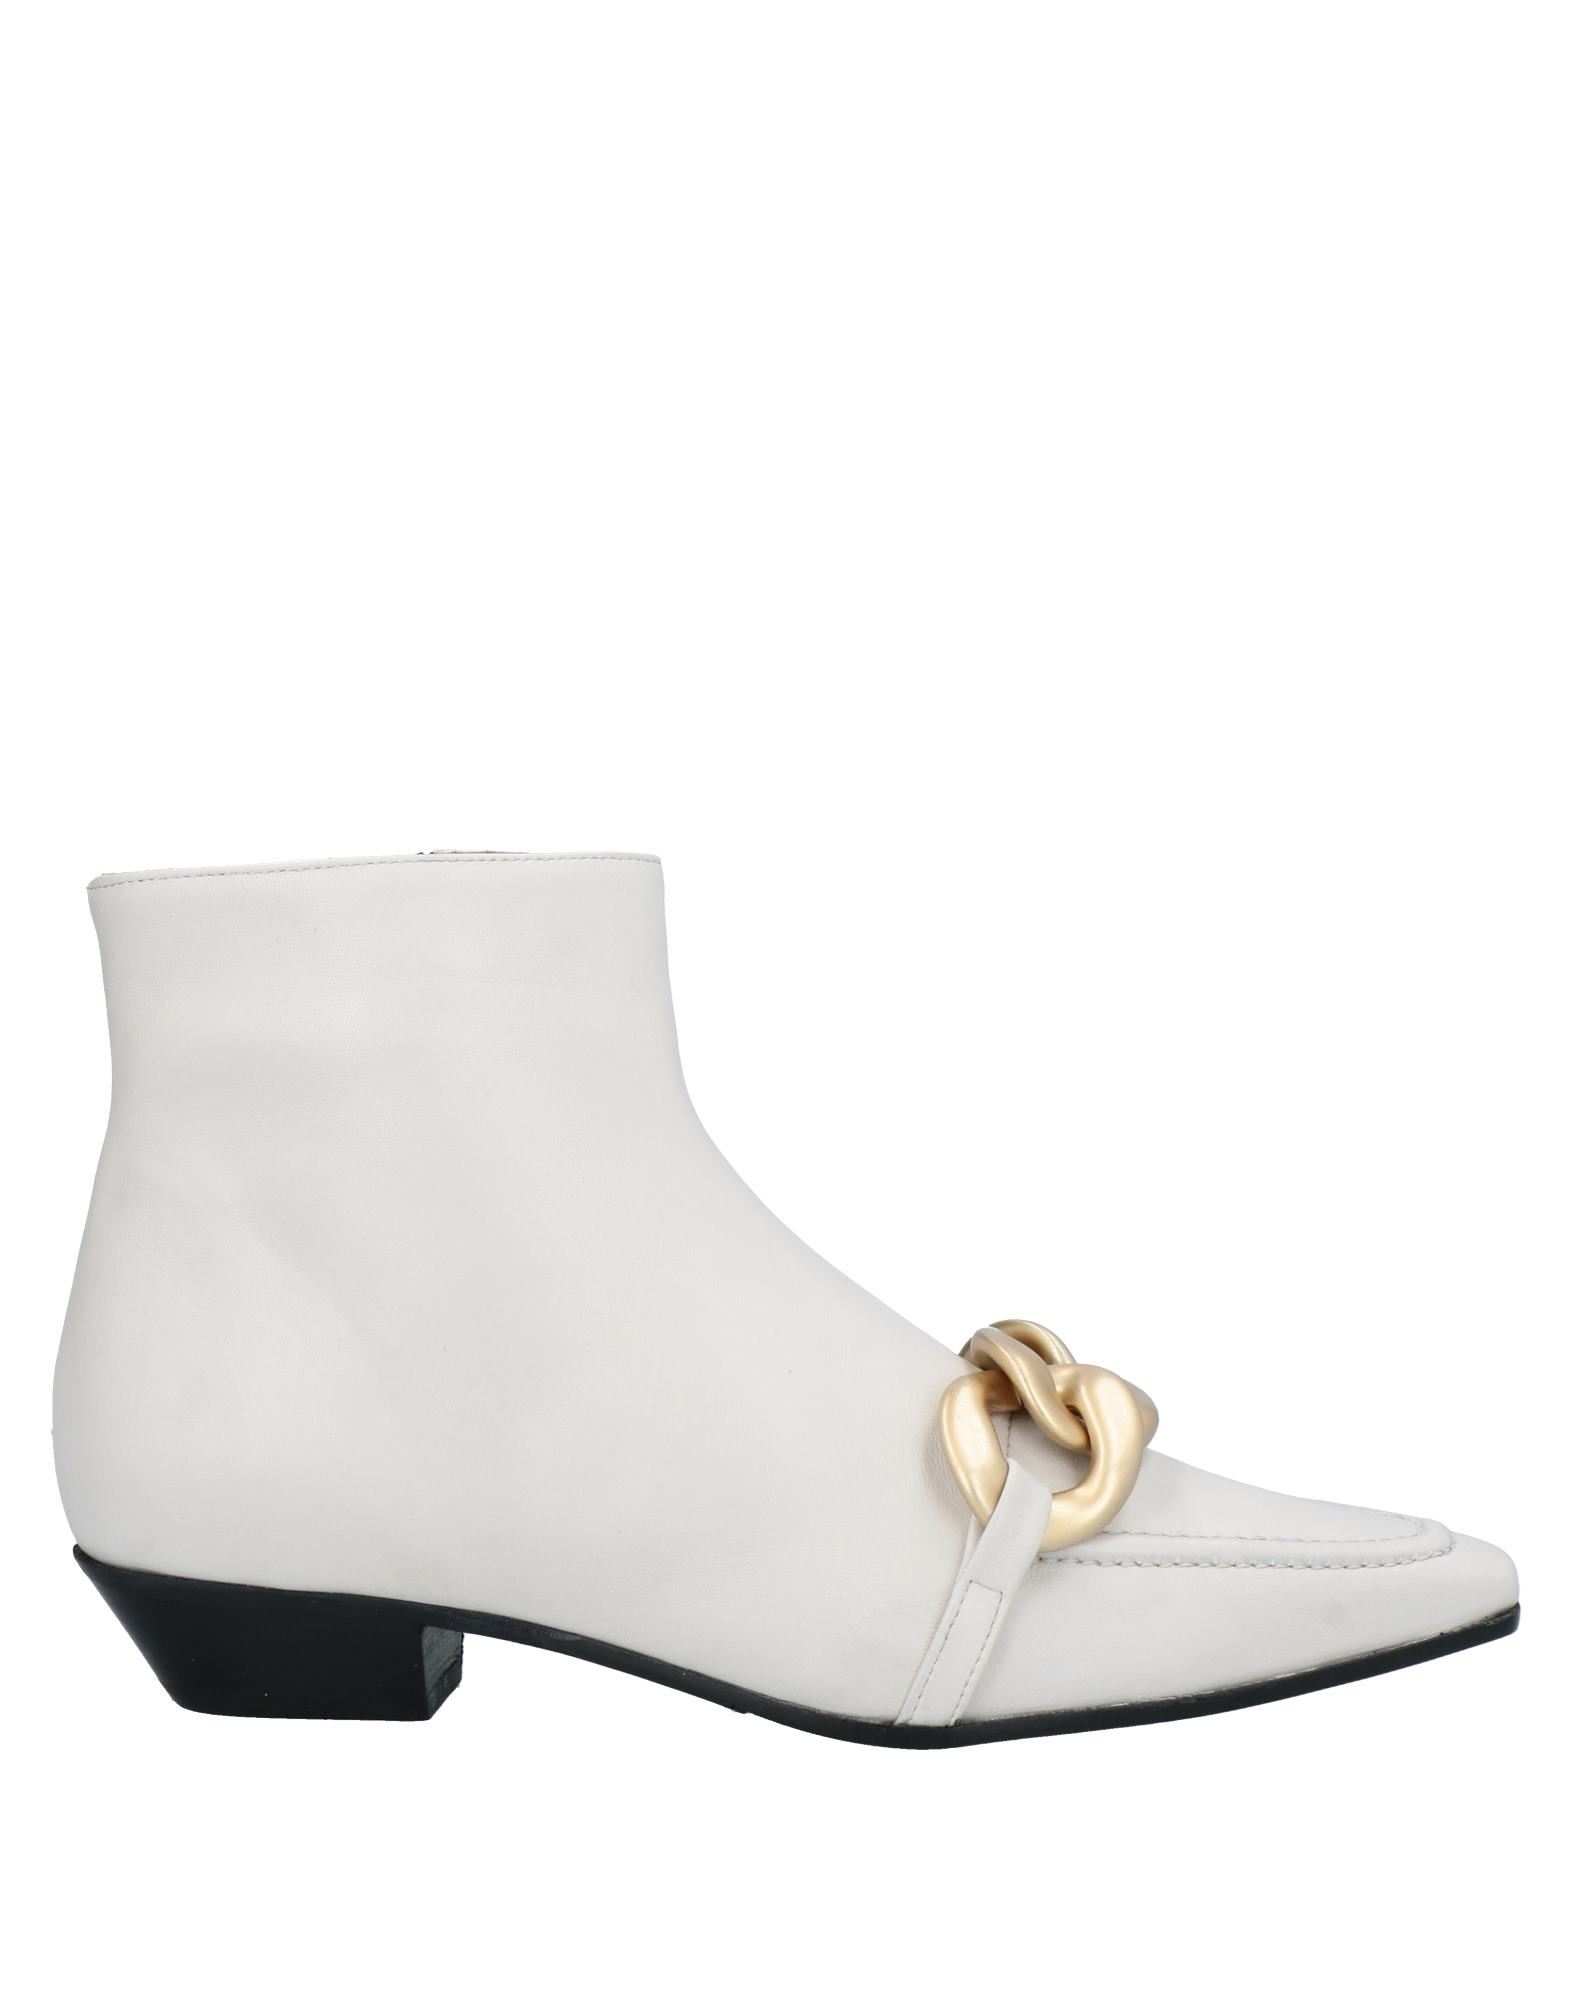 Ovye' By Cristina Lucchi Ankle Boots In Light Grey